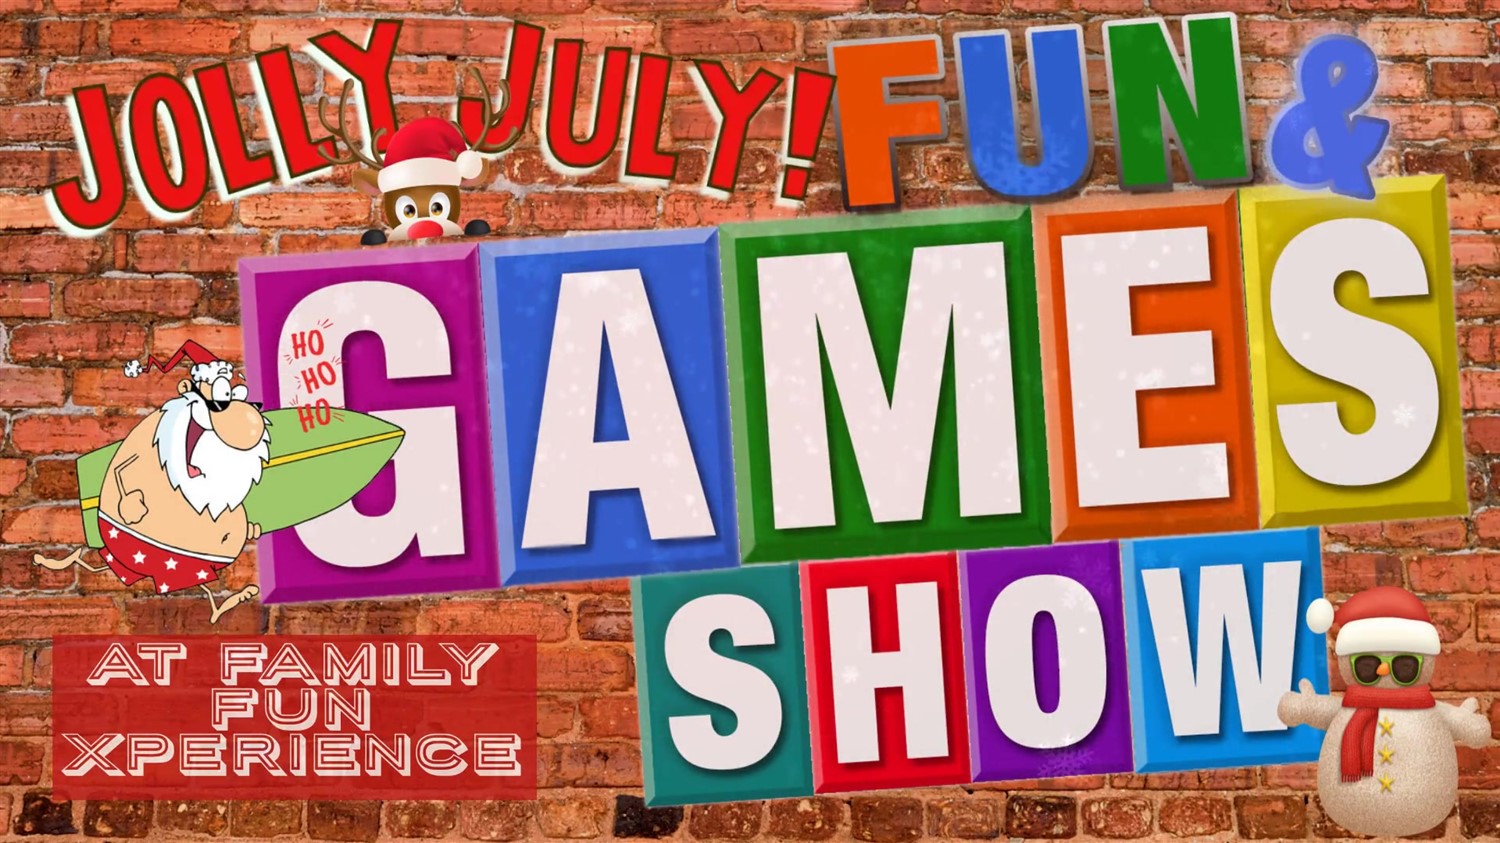 JOLLY JULY Fun & Games Show! Including a visit from SANTA! on Jul 23, 19:00@FFX Theatre - Pick a seat, Buy tickets and Get information on Family Fun Xperience tickets.ffxshow.org